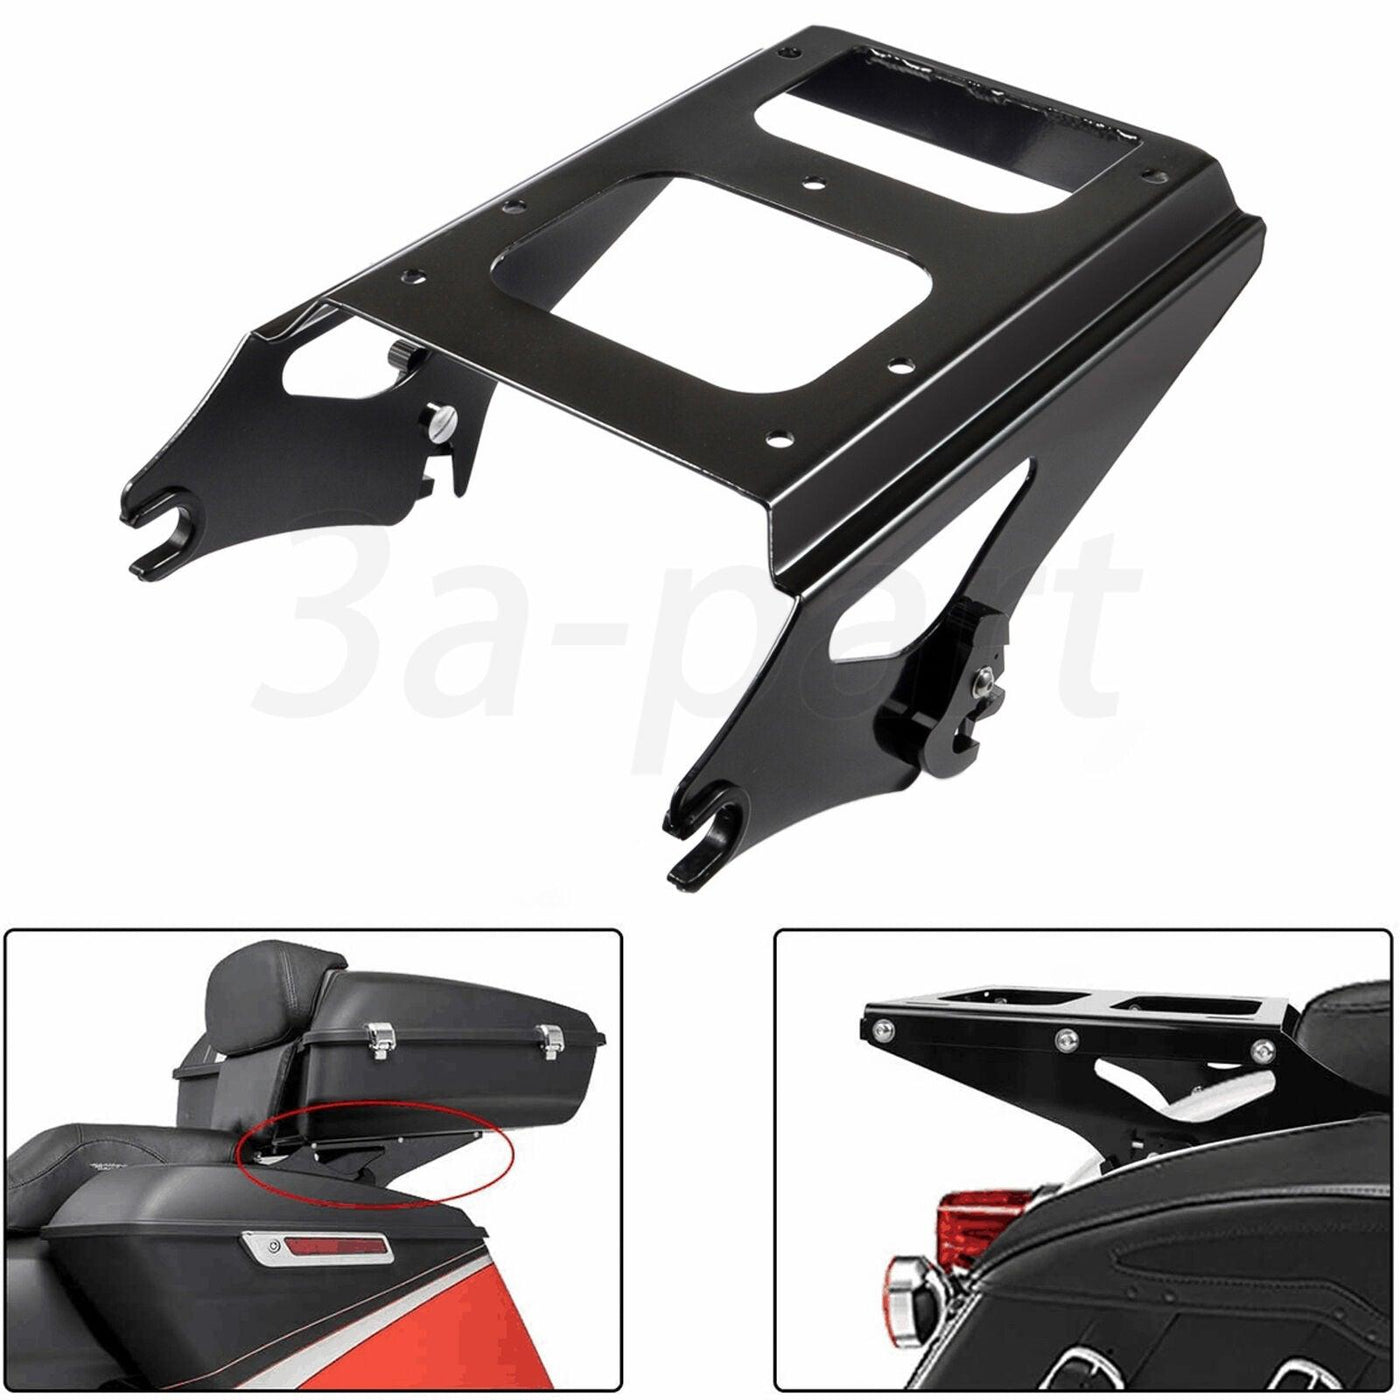 Detachable Two Up Tour Pack Mounting Rack Fit For Harley Road Glide King 2009-13 - Moto Life Products